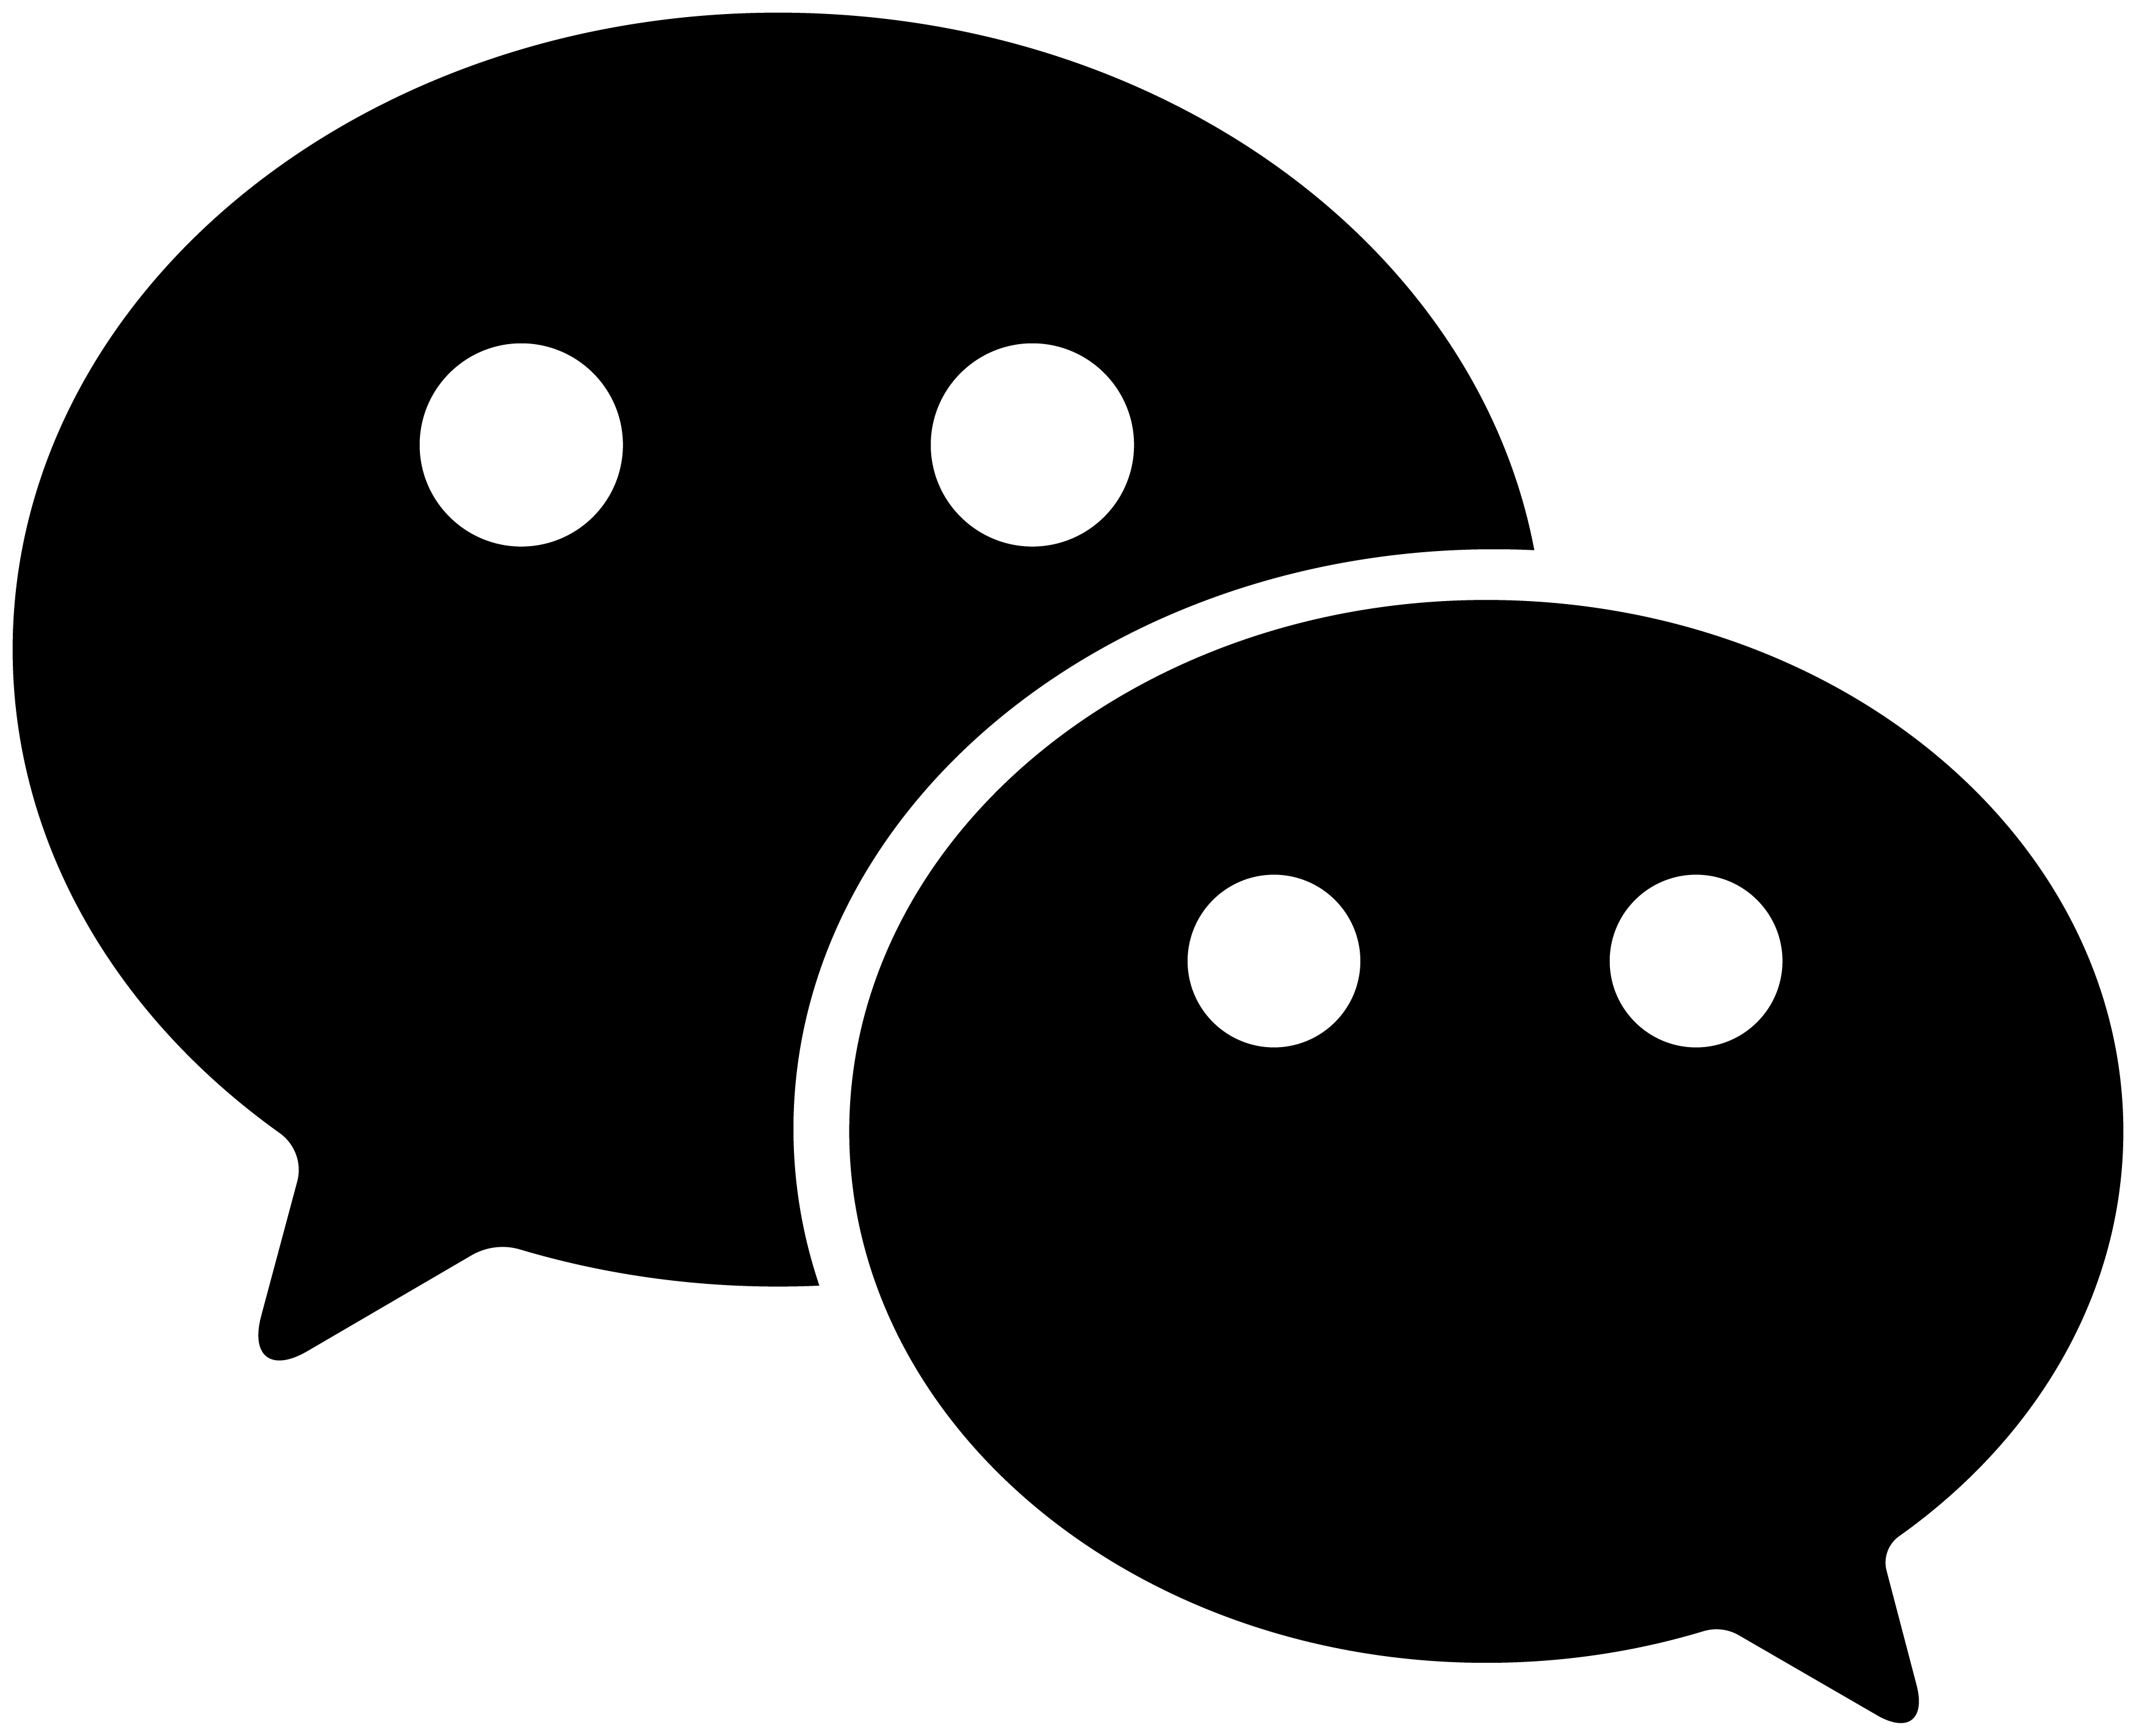 We Chat Logo - Wechat Logo Vector PNG Transparent Wechat Logo Vector.PNG Images ...